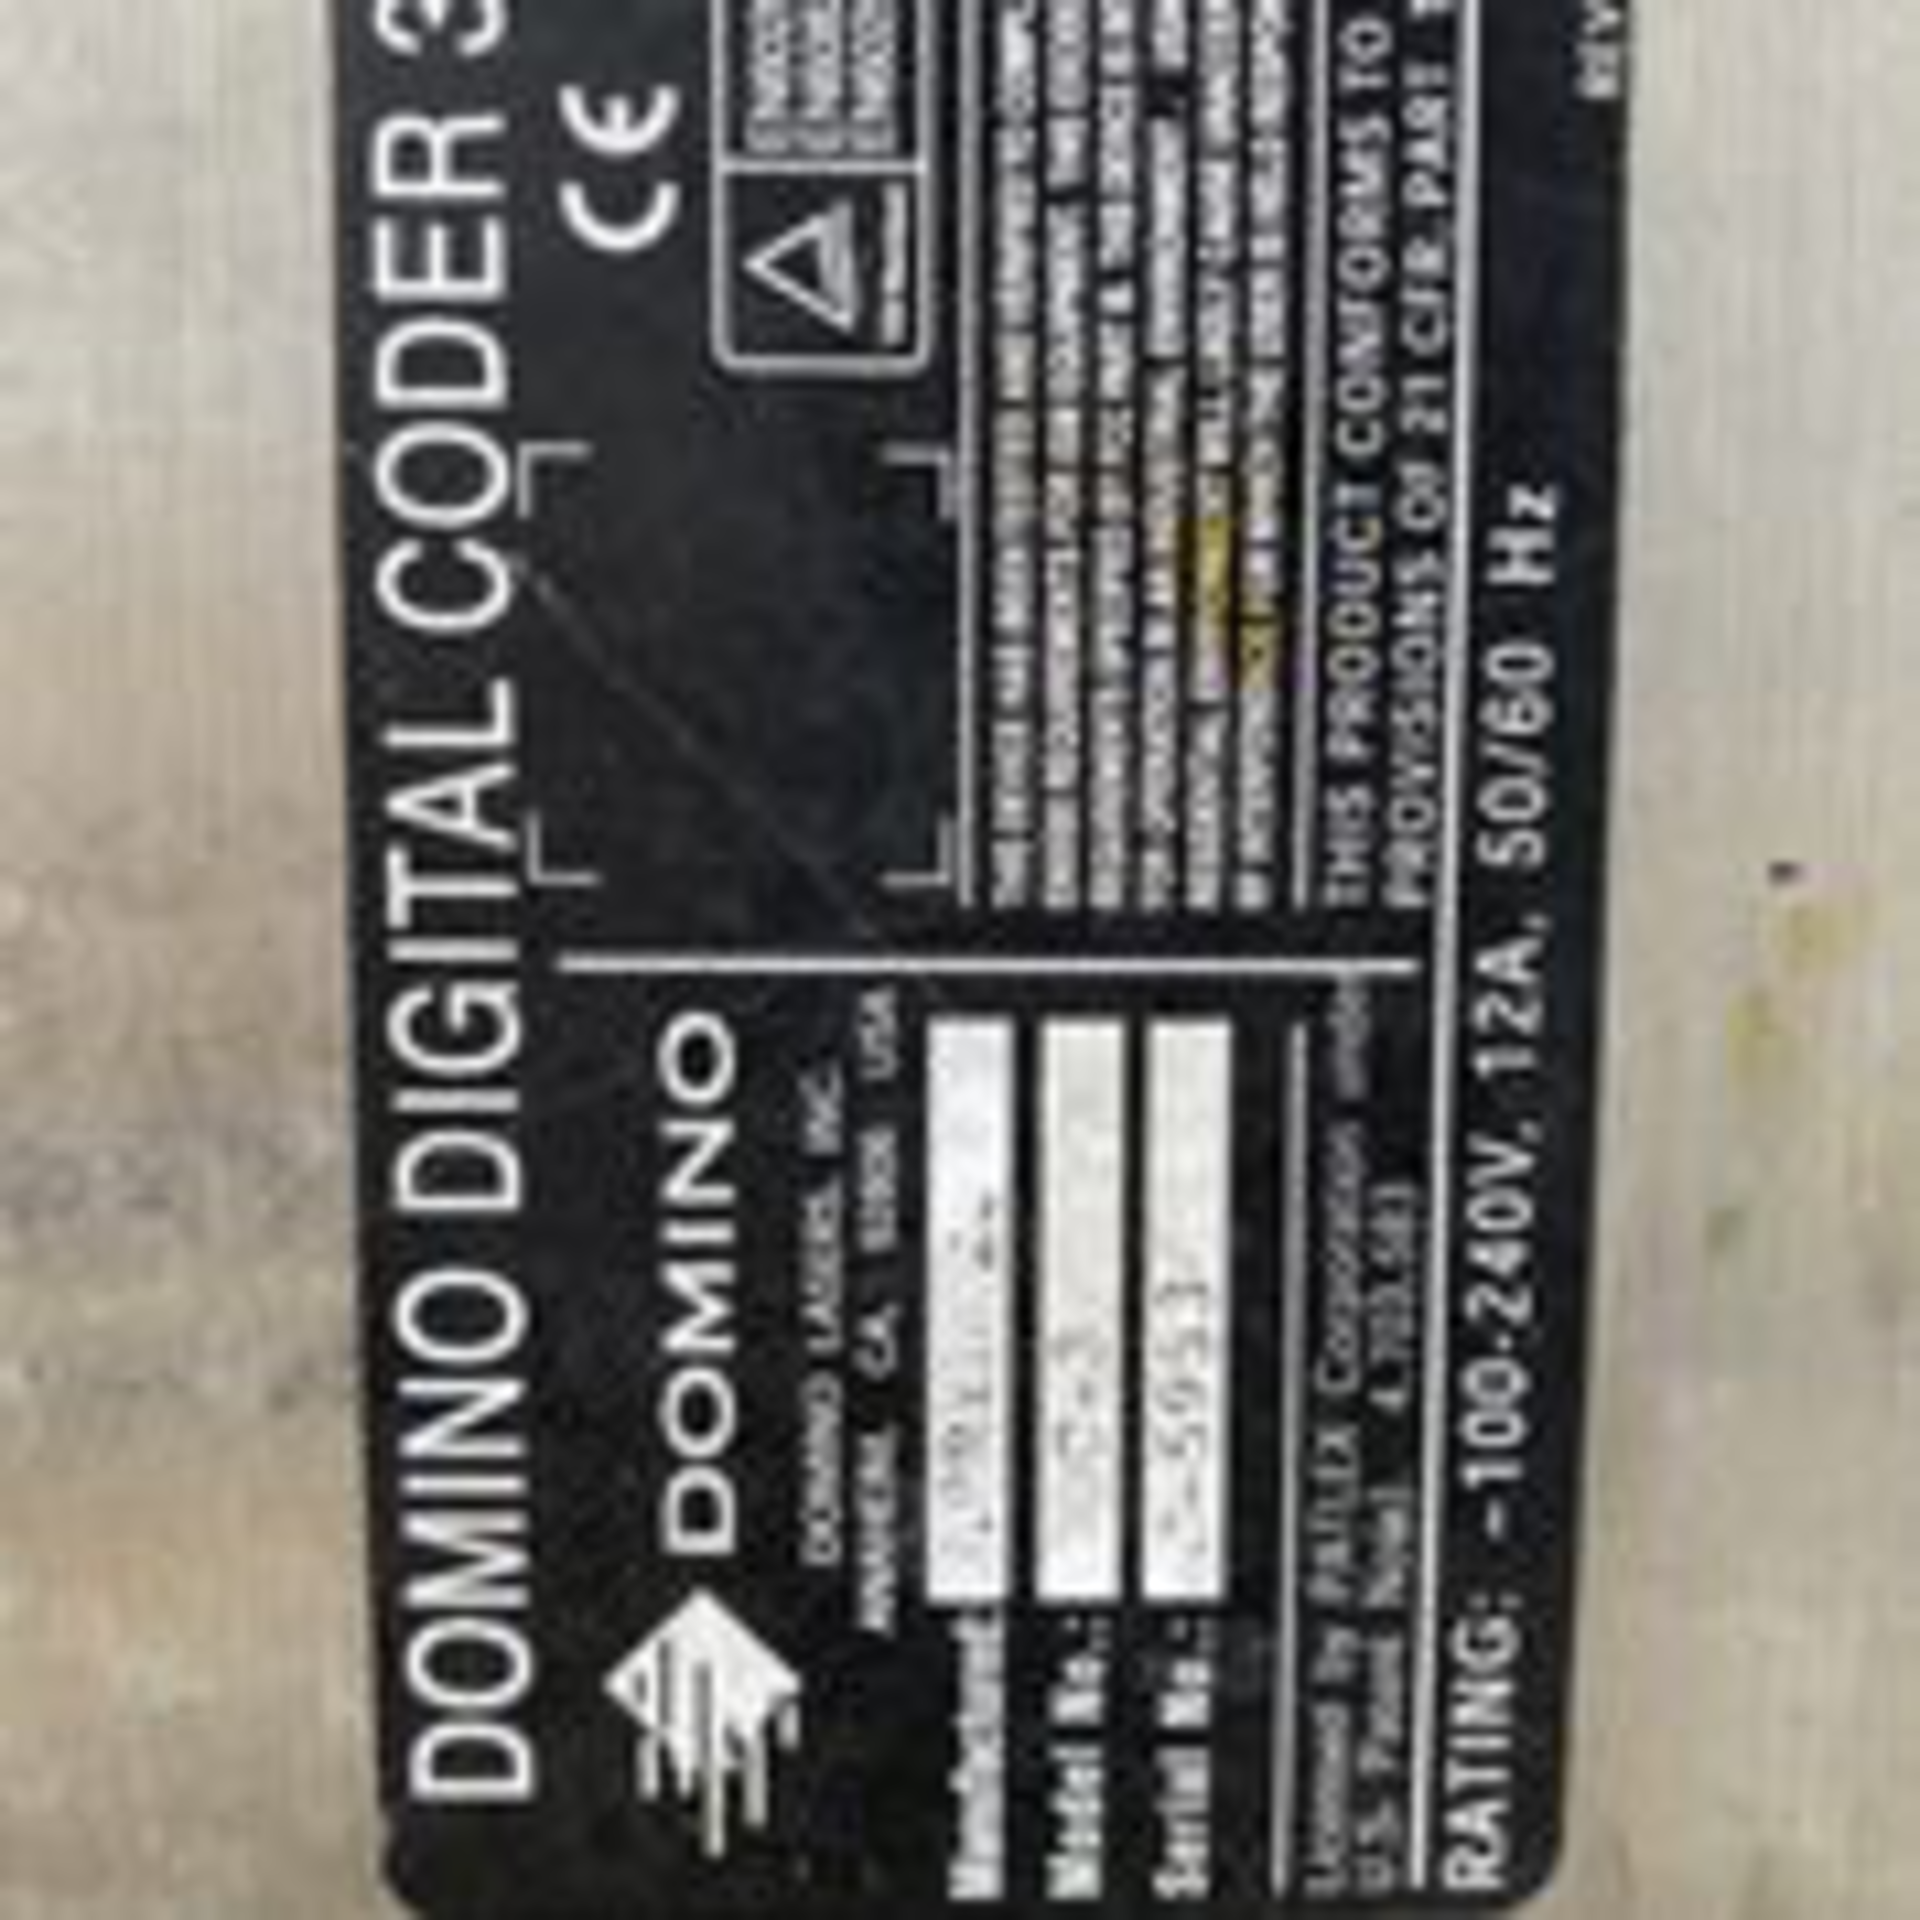 Domino DDC3 Coder. LOADING FEE $50 - Image 6 of 6